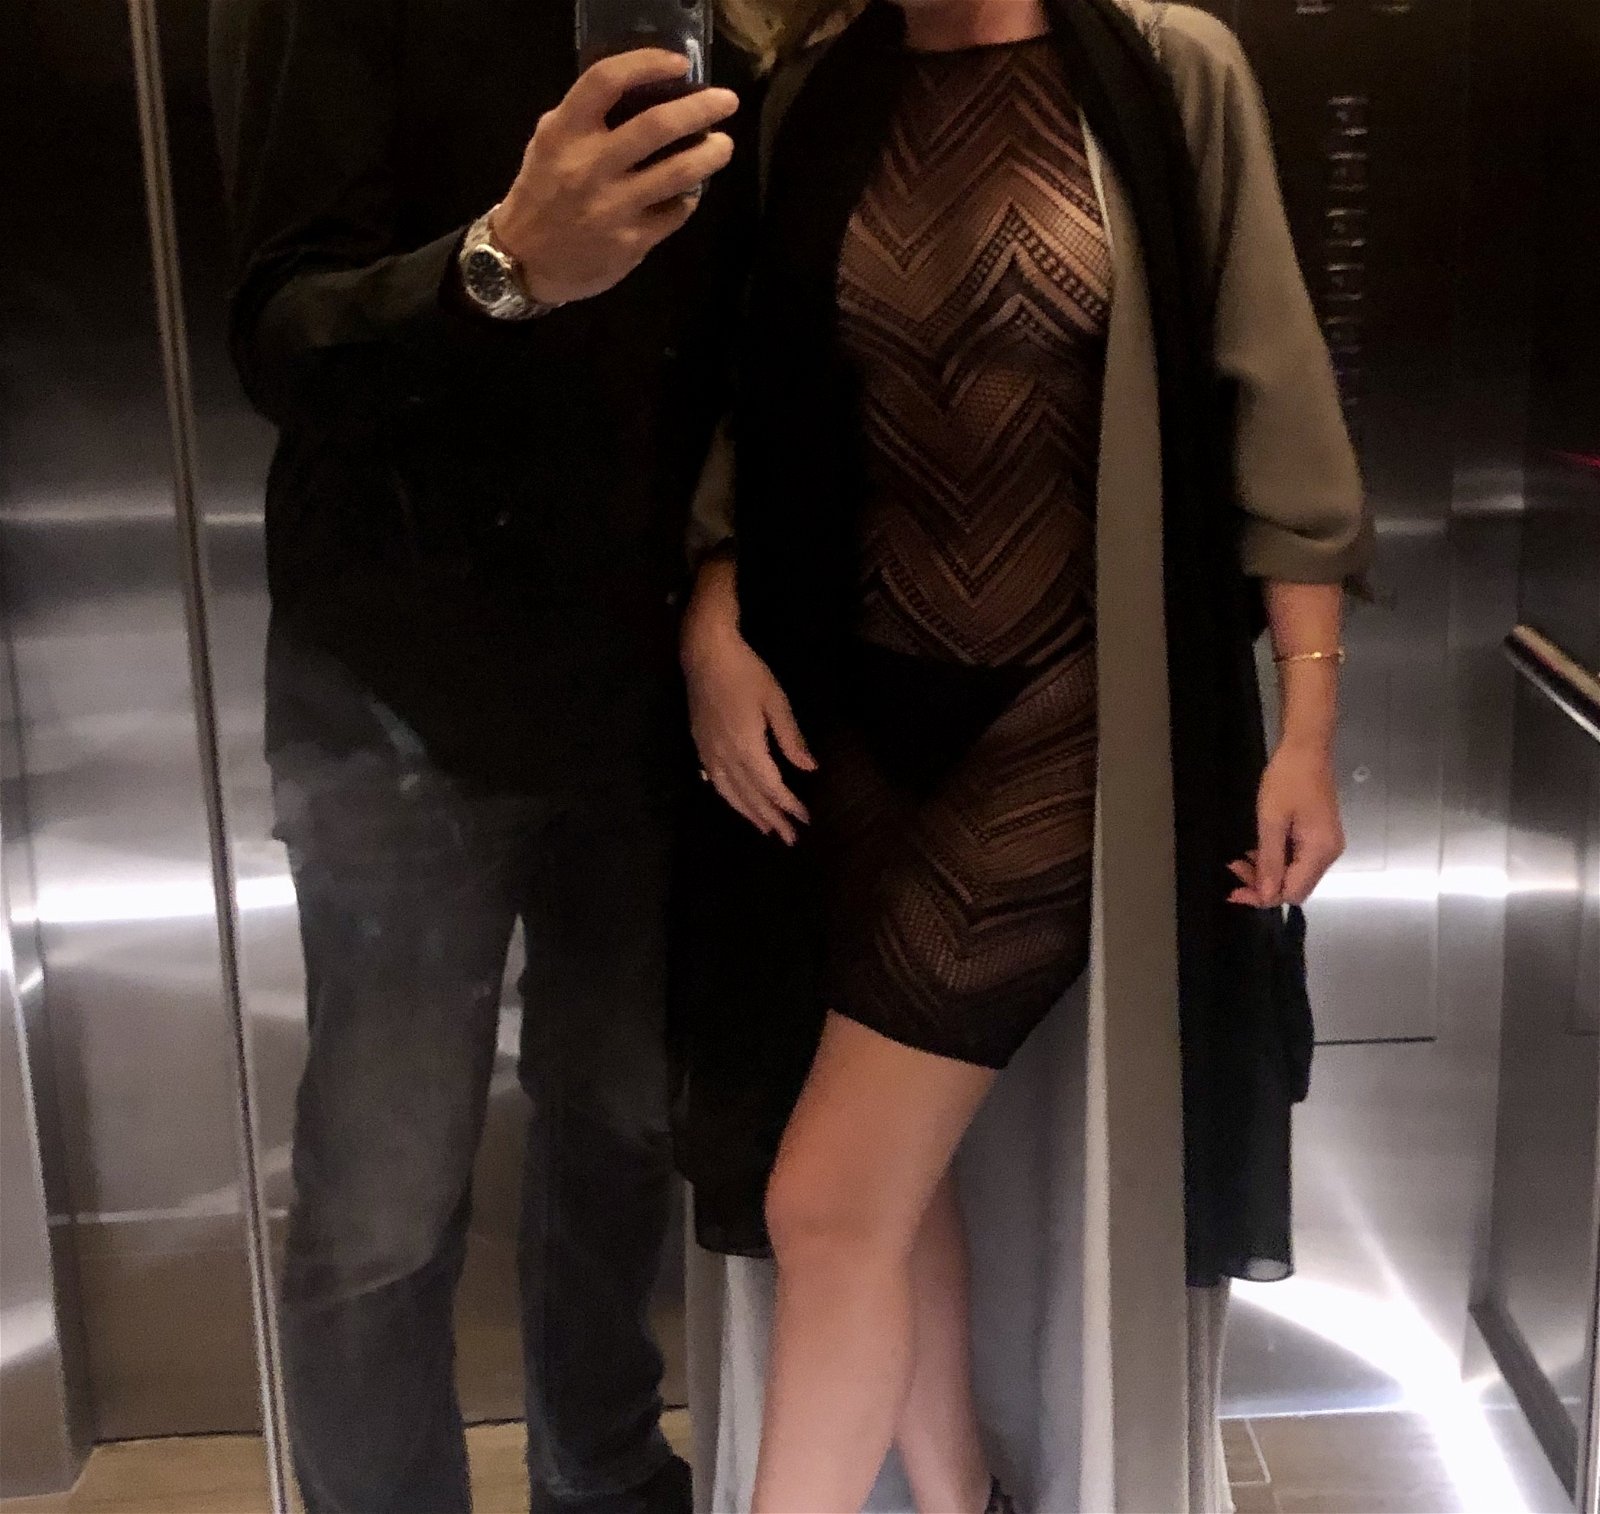 Photo by Jet Set Hotwife with the username @Jetsethotwife, who is a verified user,  August 13, 2020 at 7:39 PM. The post is about the topic Swingers and the text says 'Party time 😈😘

#realpic #swingers #lifestyle'